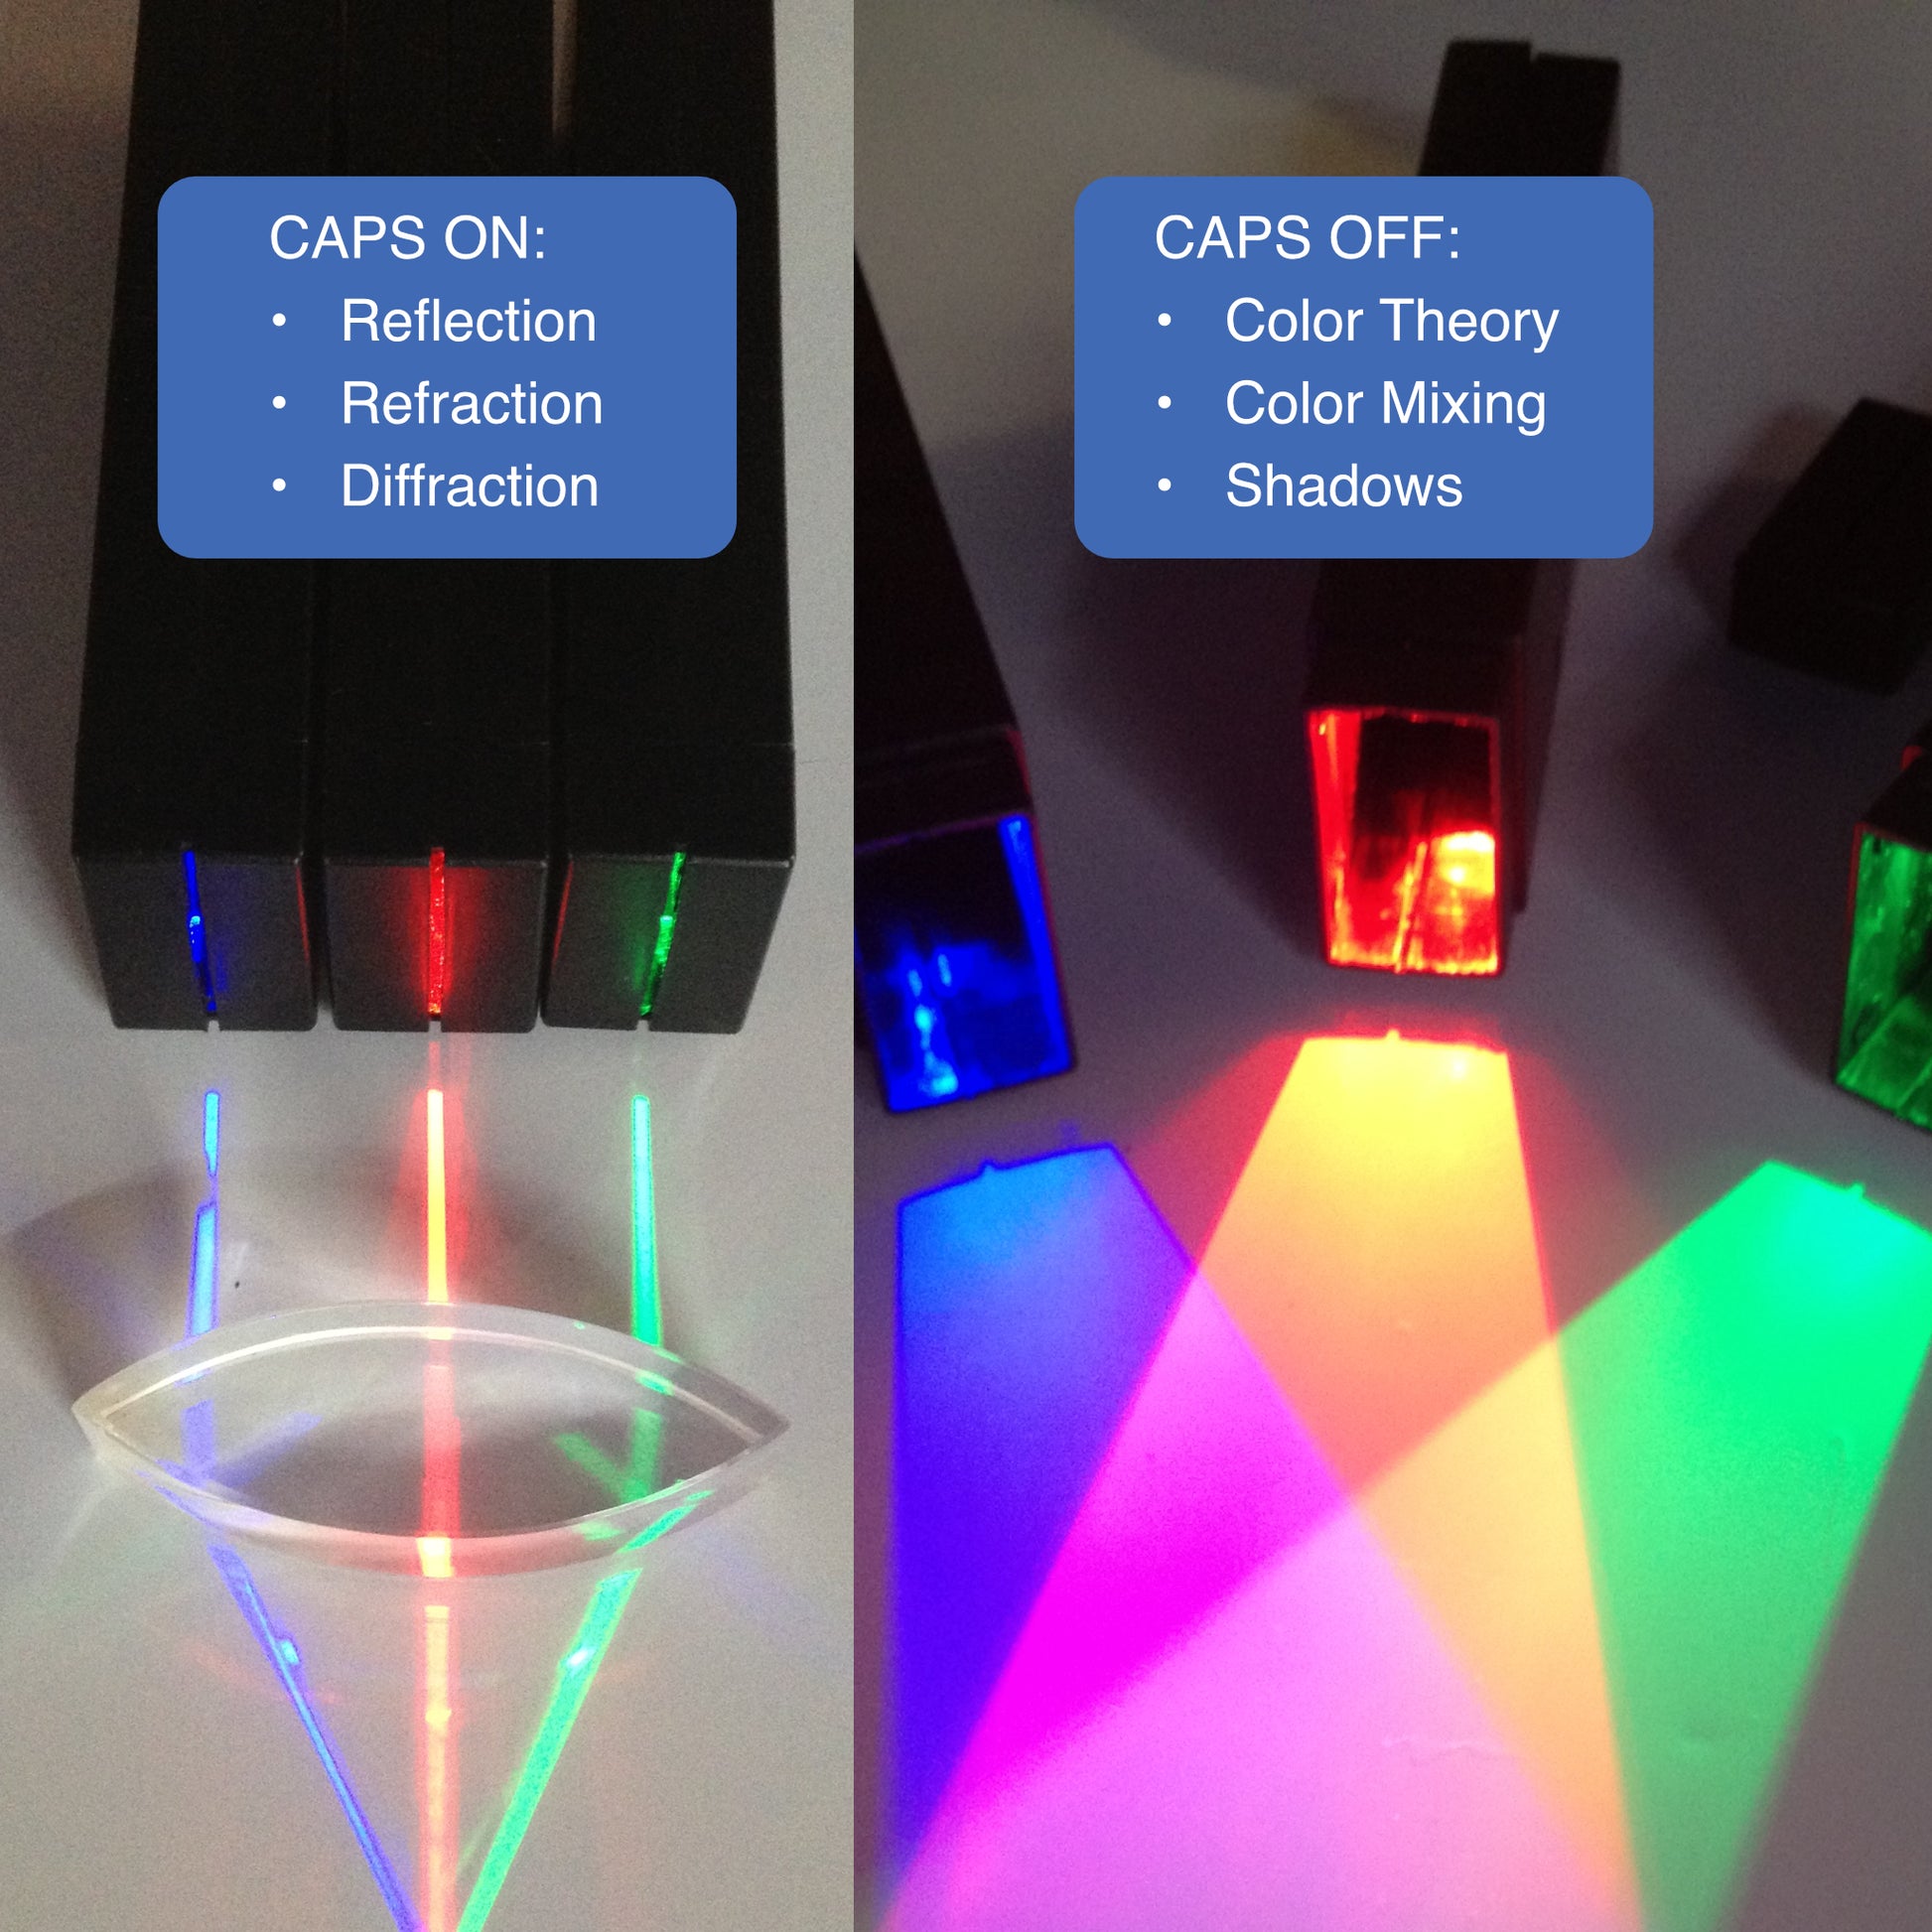 light-blox-primary-colors-mixing-snells-law-classroom-learning-teaching-kit-light-blox-primary-colors-mixing-reflection-classroom-lessons-diffraction-refraction